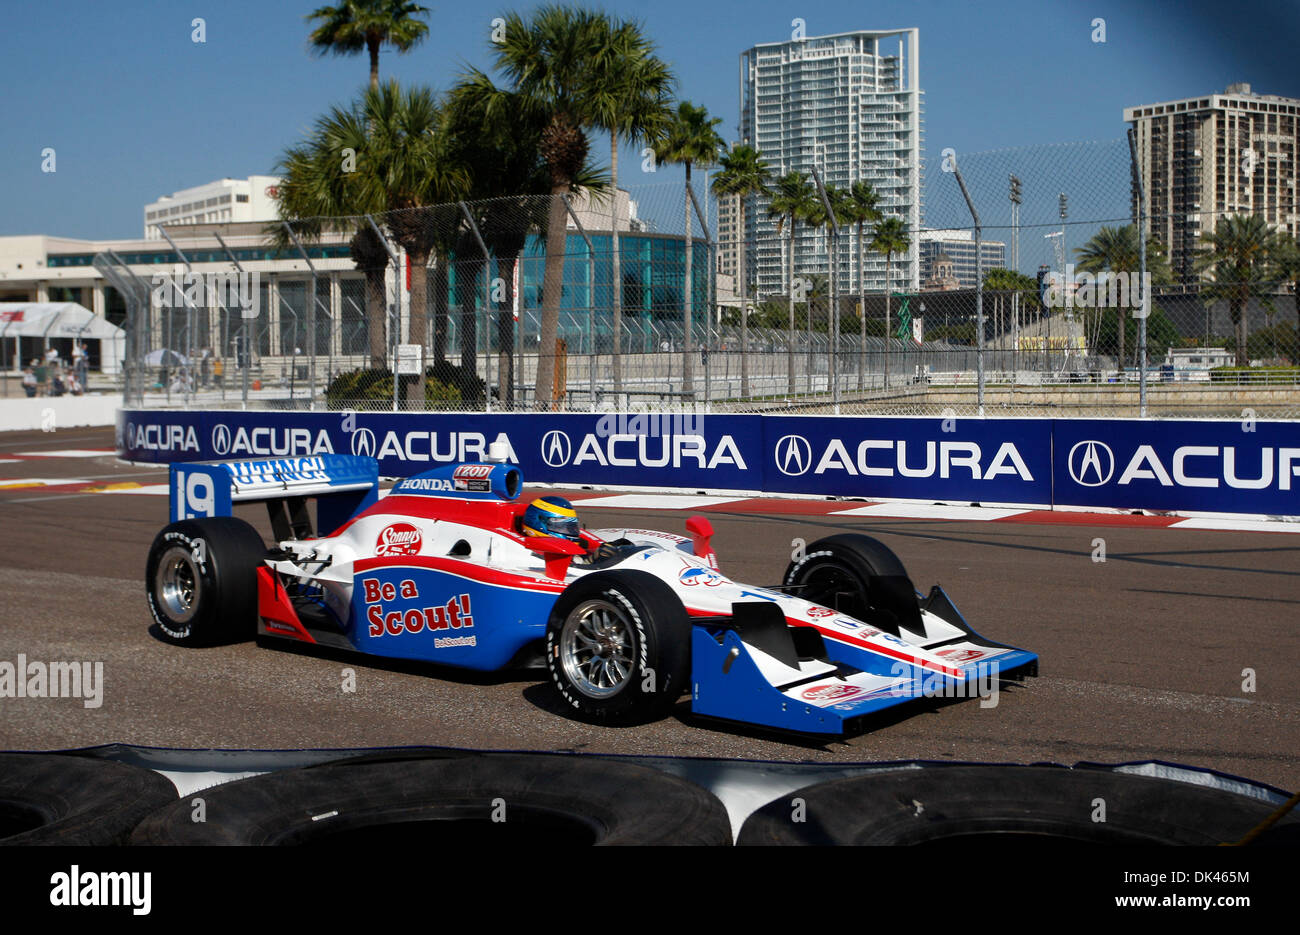 Mar. 25, 2011 - St. Pete, FL - DIRK SHADD   |  Times .SP 336219 SHAD GRANDPRIX 02 (03/25/11 ST. PETE) IndyCar driver Sebastien Bourdais (car 19), with Dale Coybe Racing, makes his way through turn 10 with the Mahaffey Theater and the city of St. Petersburg in the background during the IndyCar morning practice on the opening day of the Honda Grand Prix of St. Petersburg Friday (03/2 Stock Photo